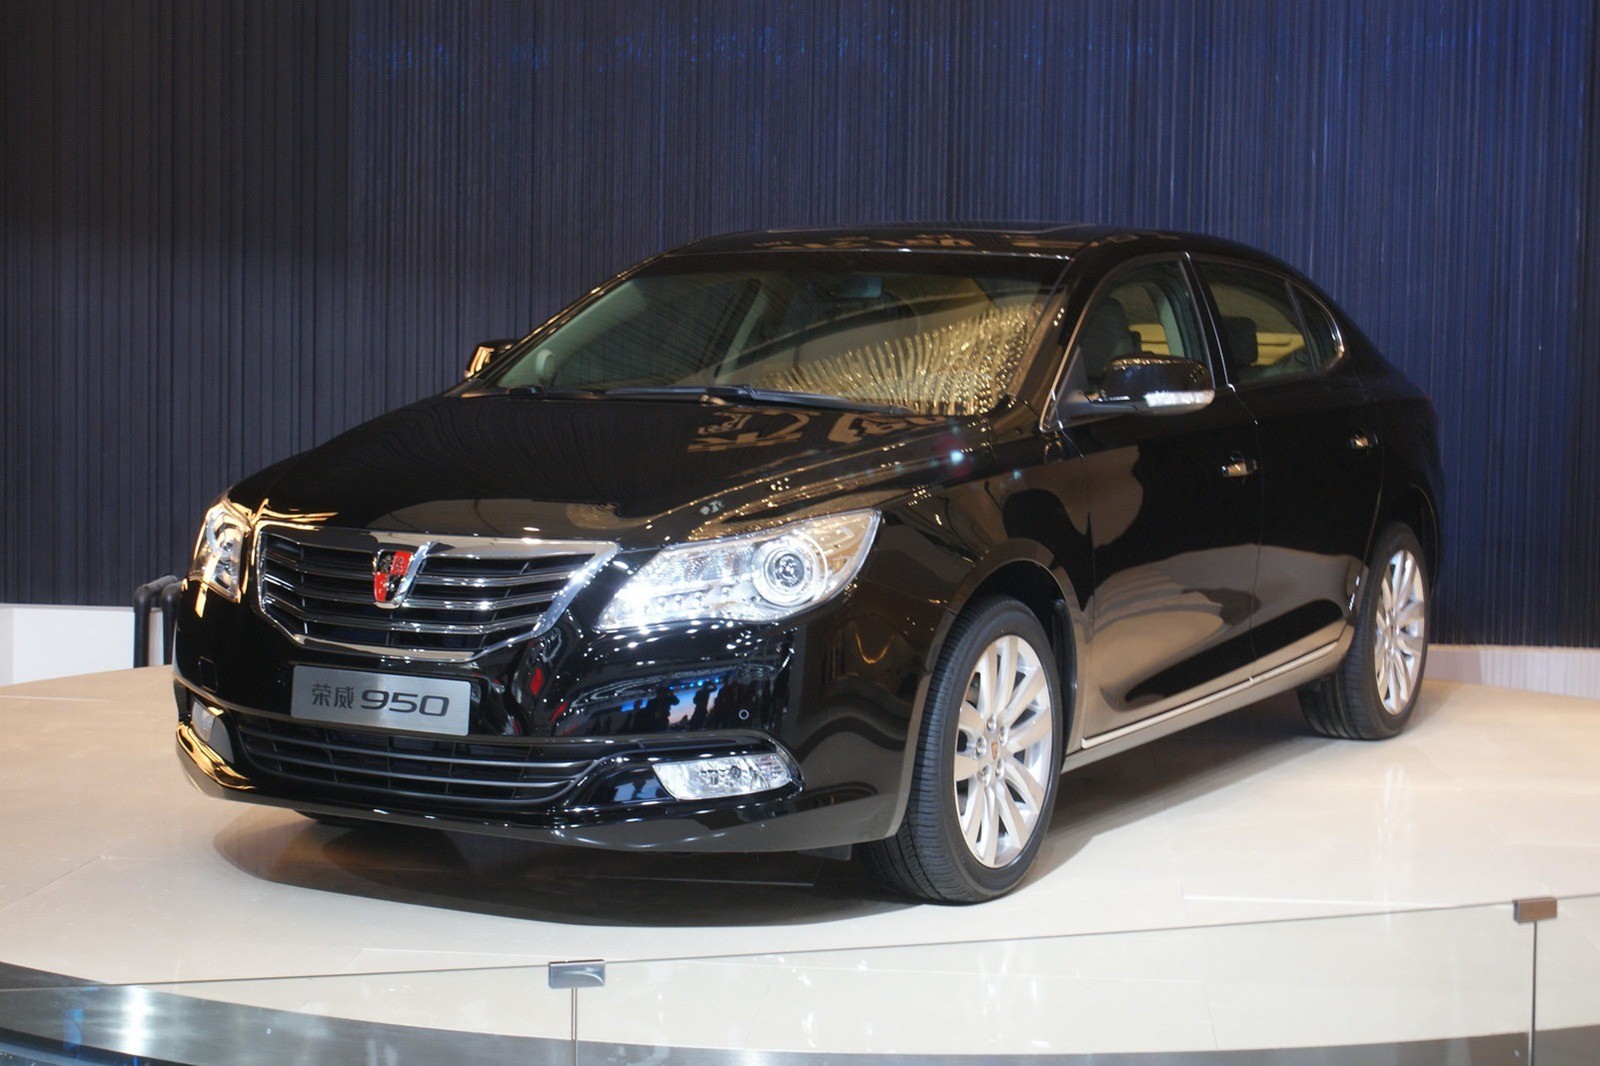 Roewe 950 - specifications, equipment, photos, video, overview